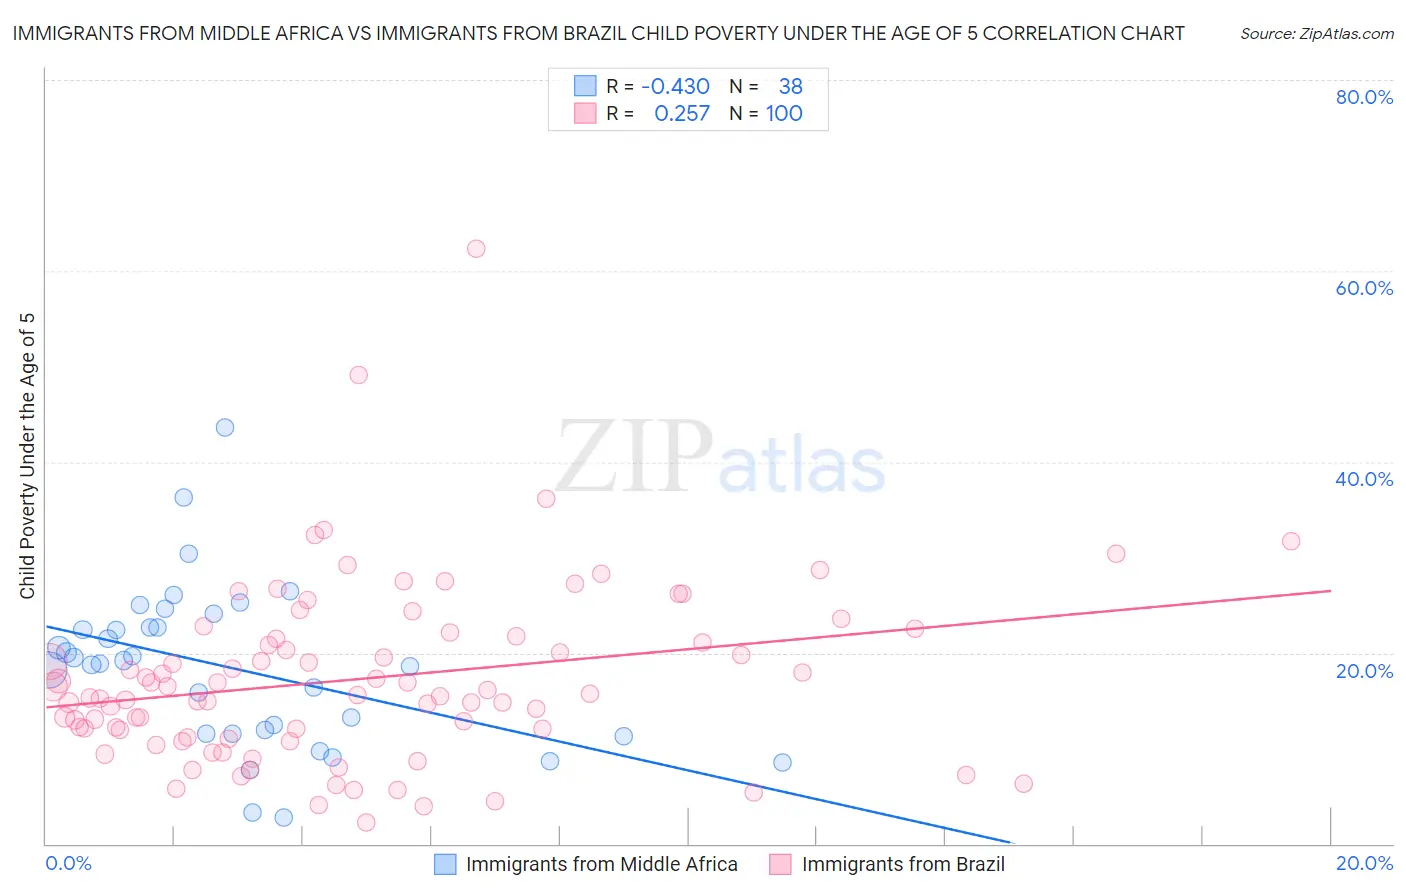 Immigrants from Middle Africa vs Immigrants from Brazil Child Poverty Under the Age of 5